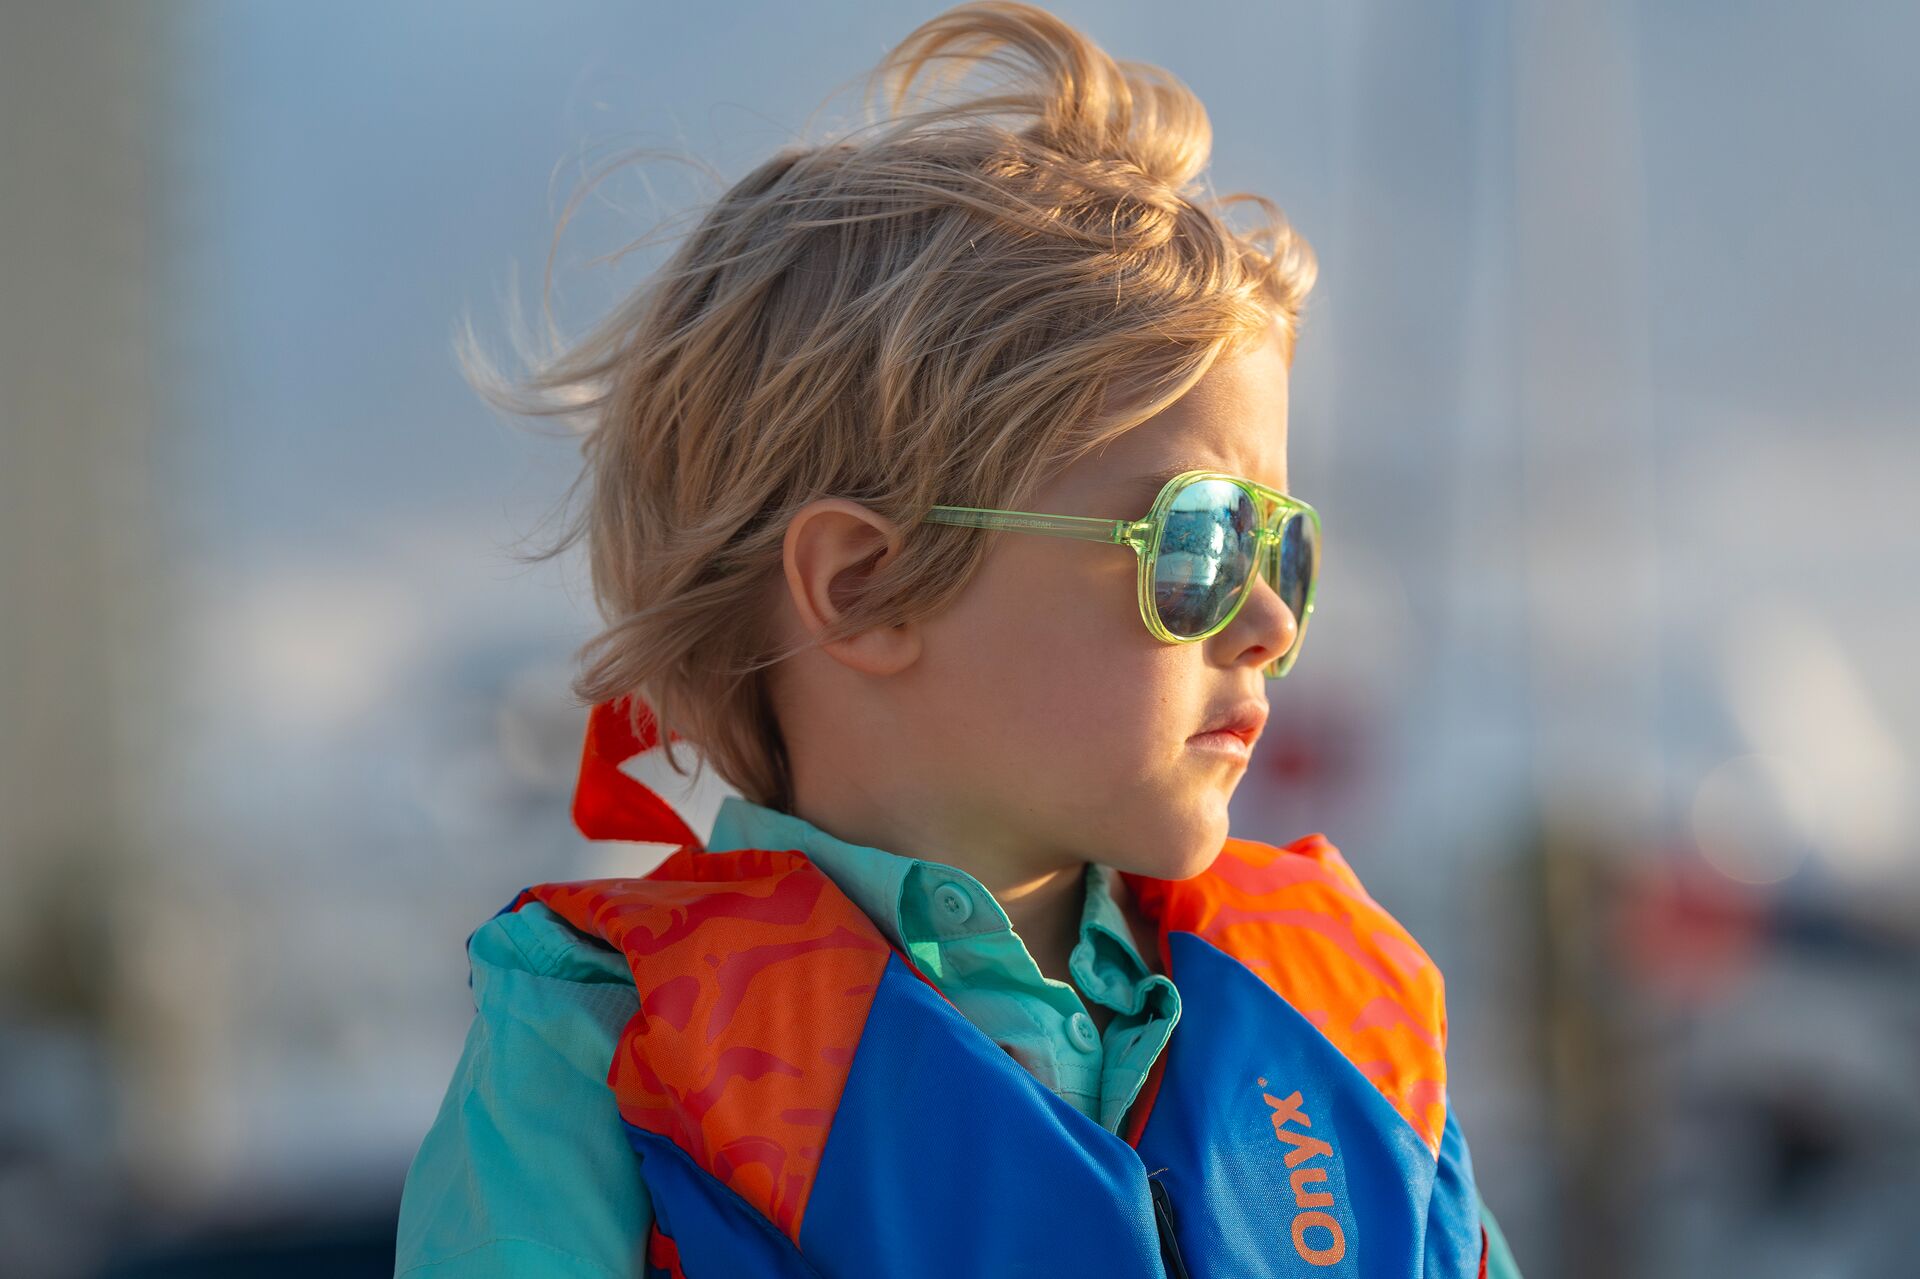 A child wearing a life jacket on a boat, Type 1 life jacket concept. 